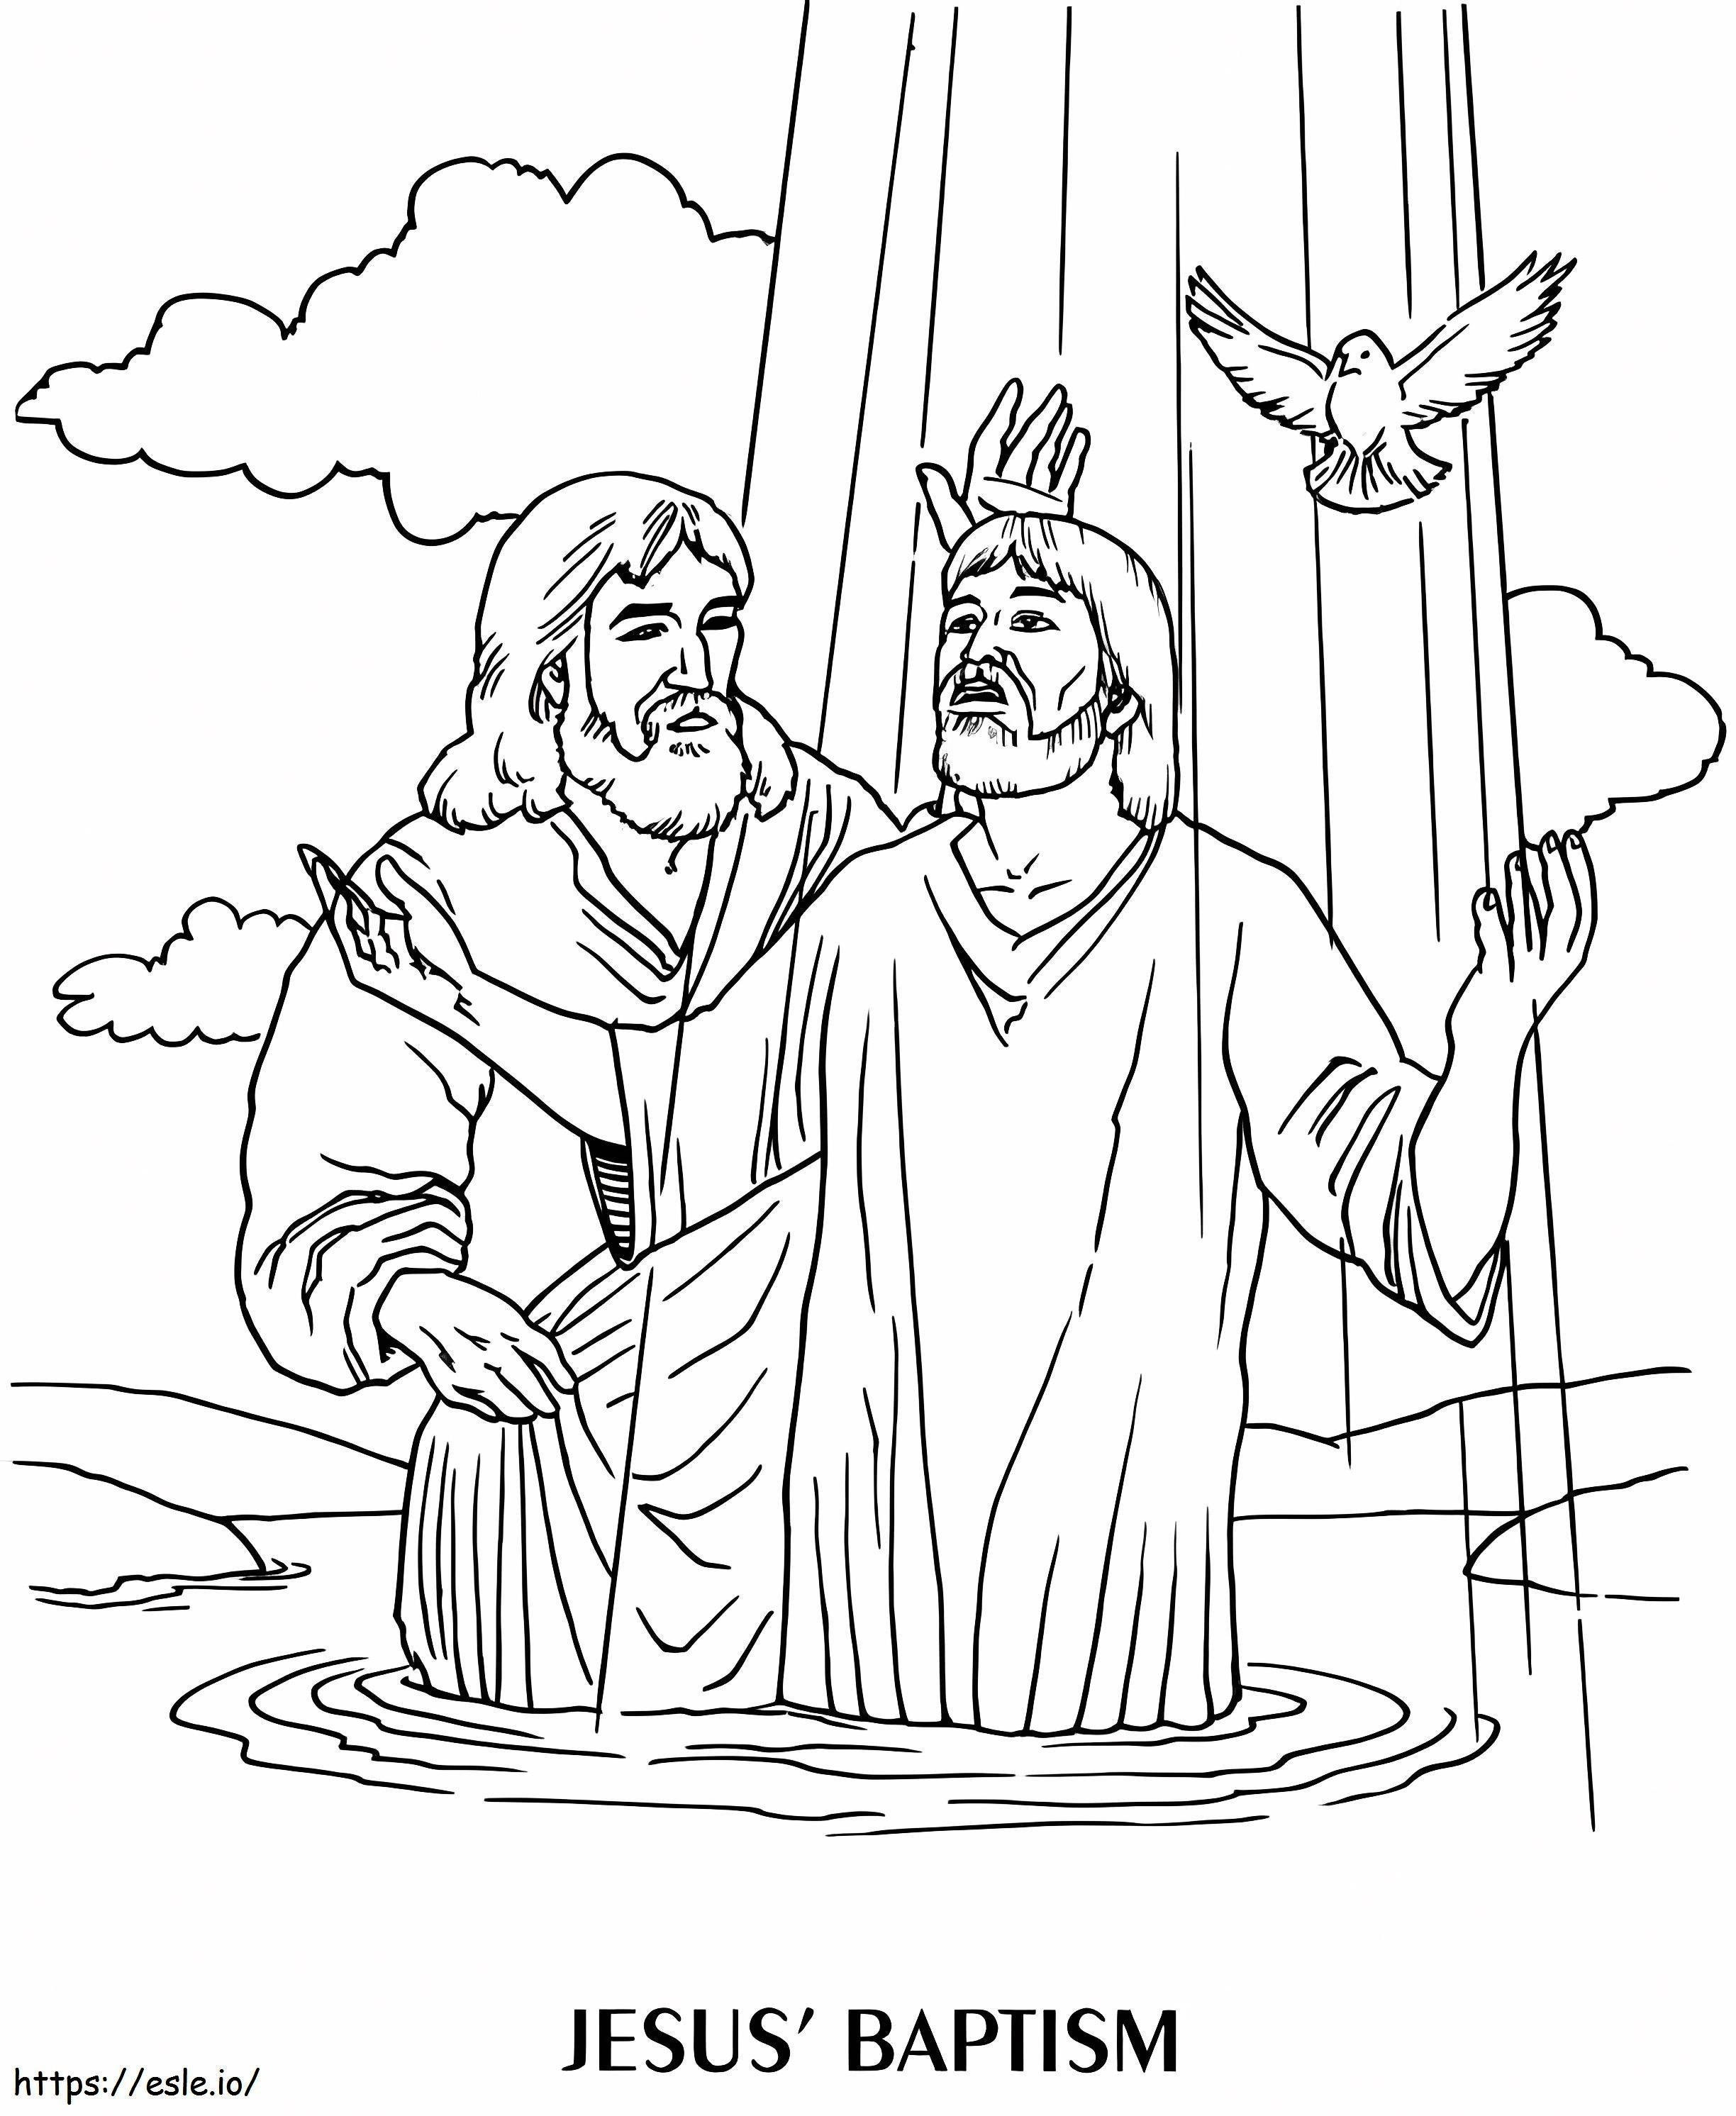 Jesuss Baptism coloring page